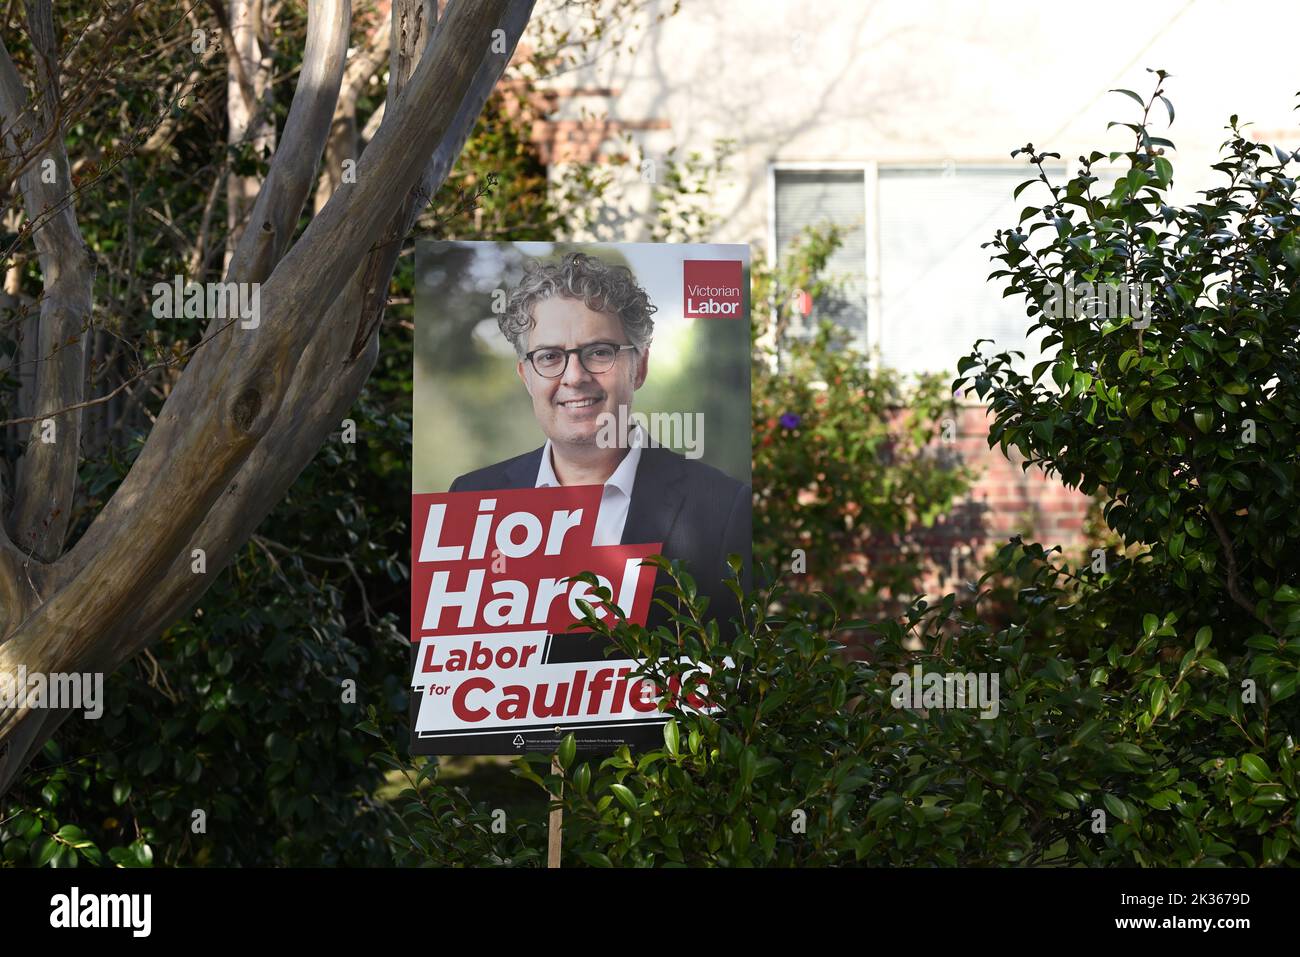 Sign promoting the candidacy of the Australian Labor Party's Lior Harel for the seat of Caulfield in a garden, partially obscured by a plant Stock Photo